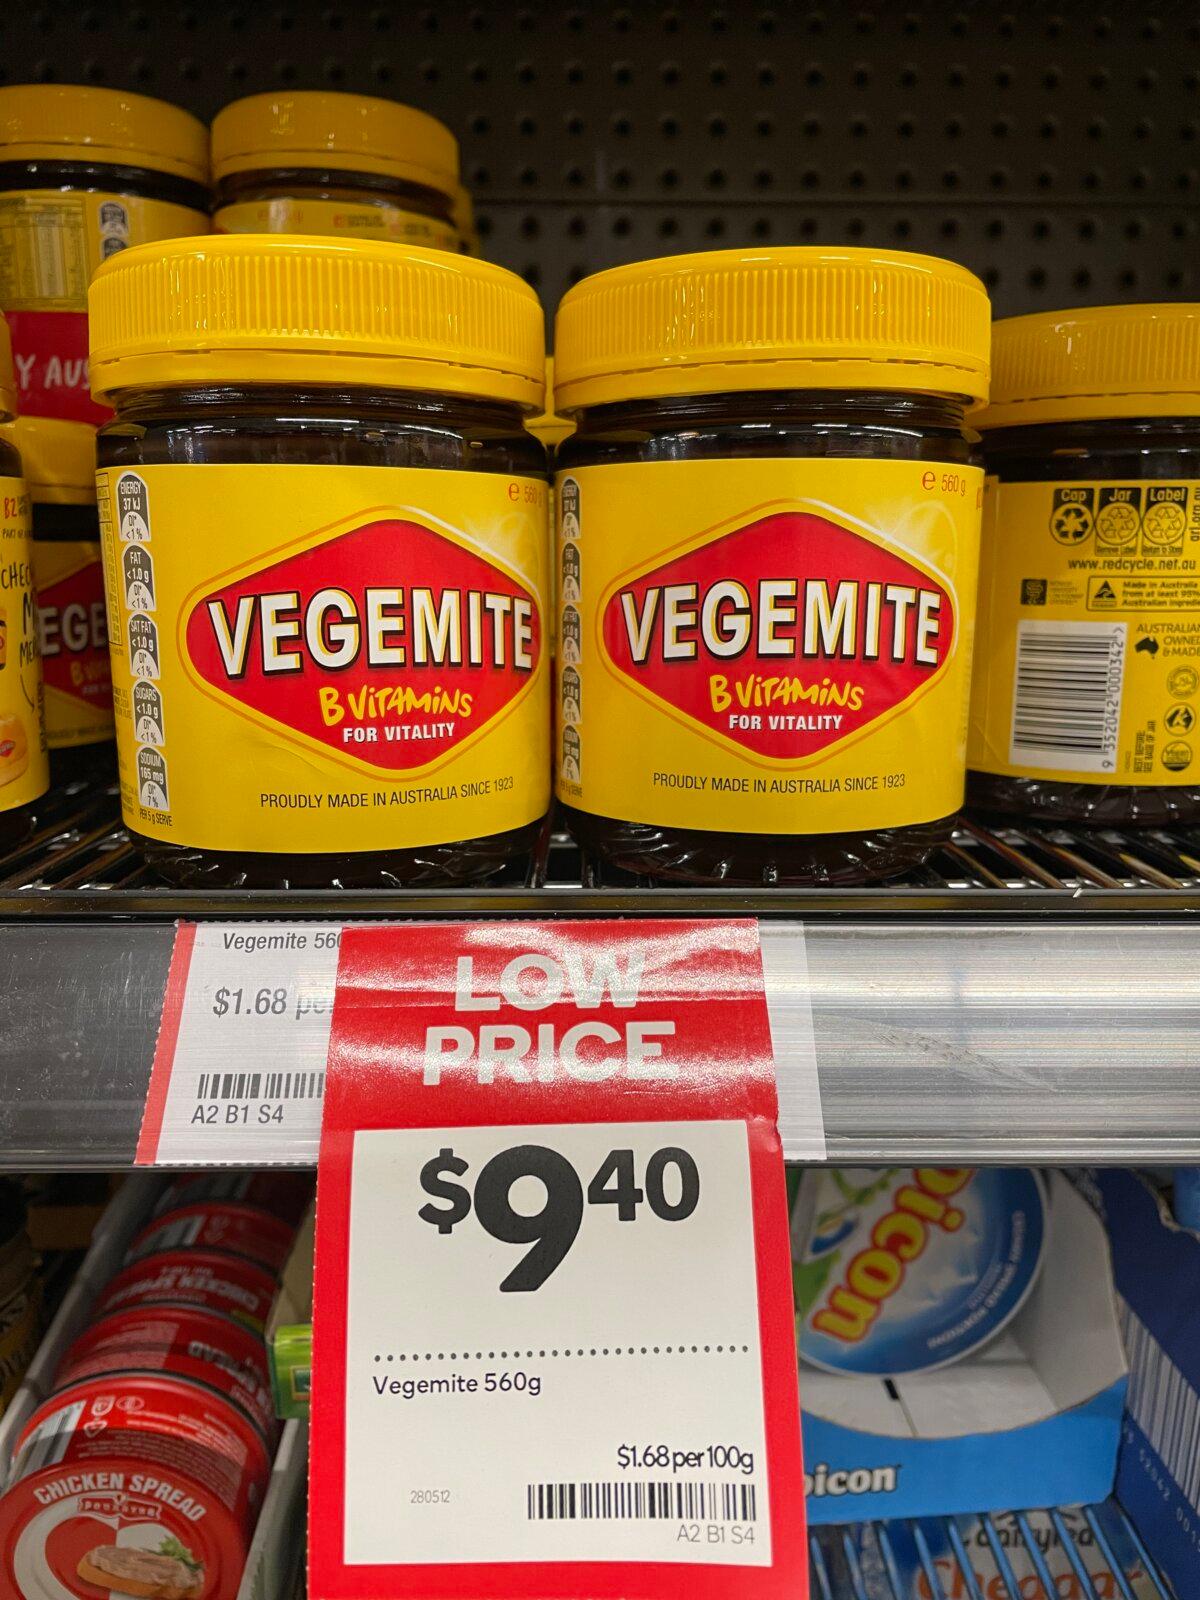 Jars of Vegemite are being sold at a price of $9.40 in Woolworths. (Jessie Zhang/The Epoch Times)